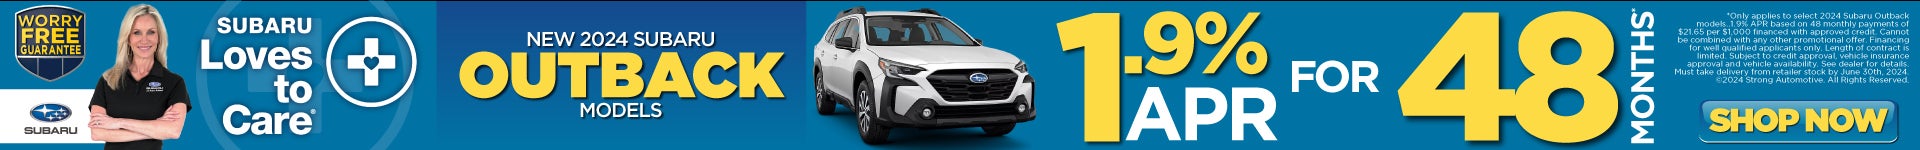 New 2024 Subaru Outback Models | 1.9% APR for 42 months*